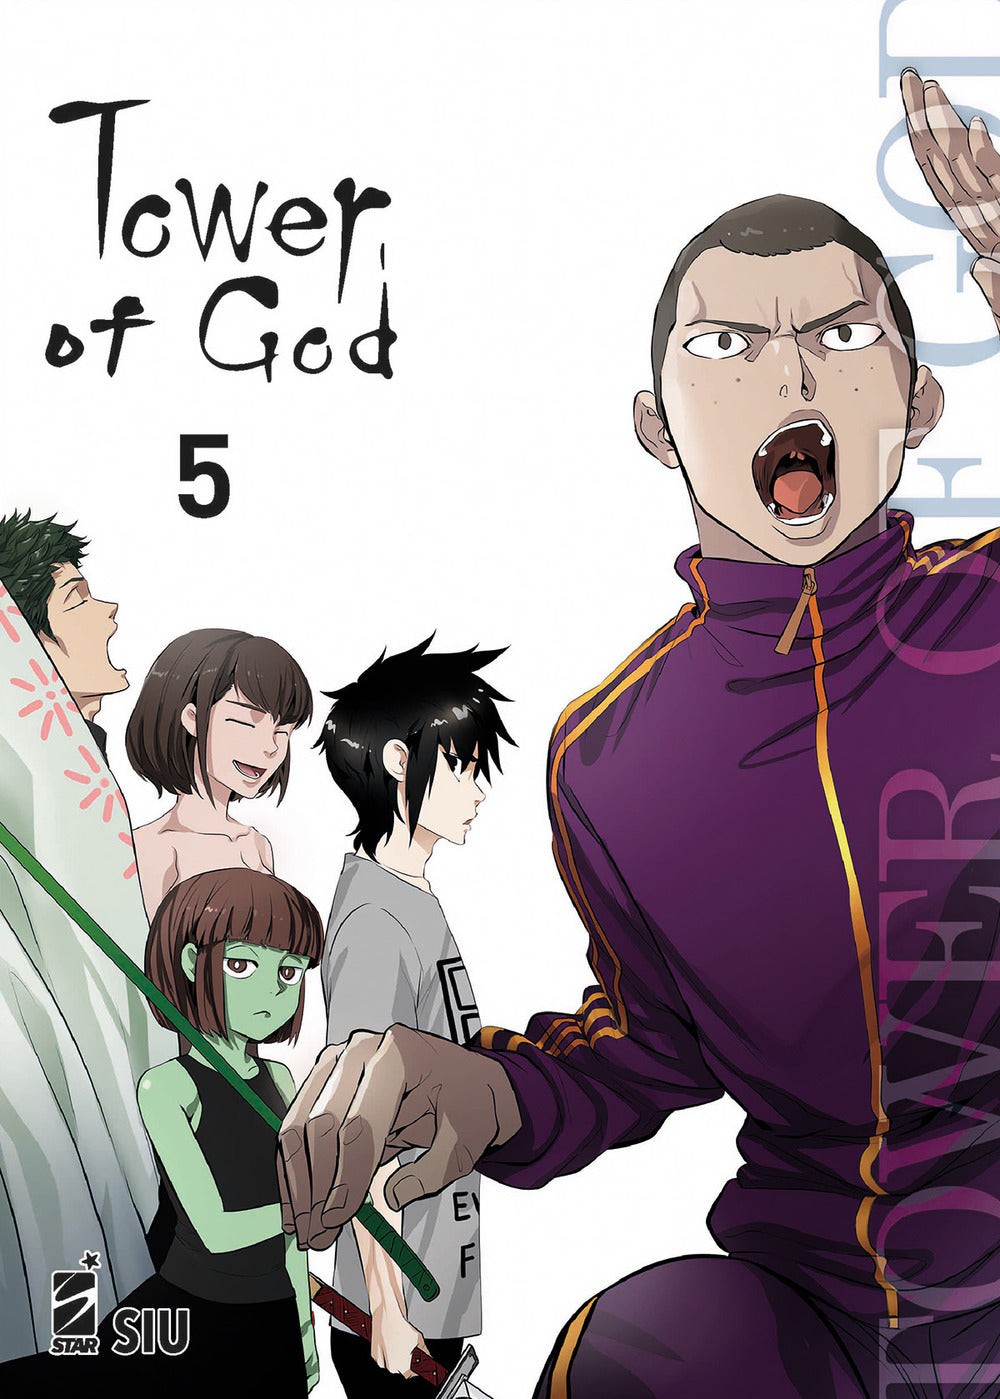 Tower of god. Vol. 5.